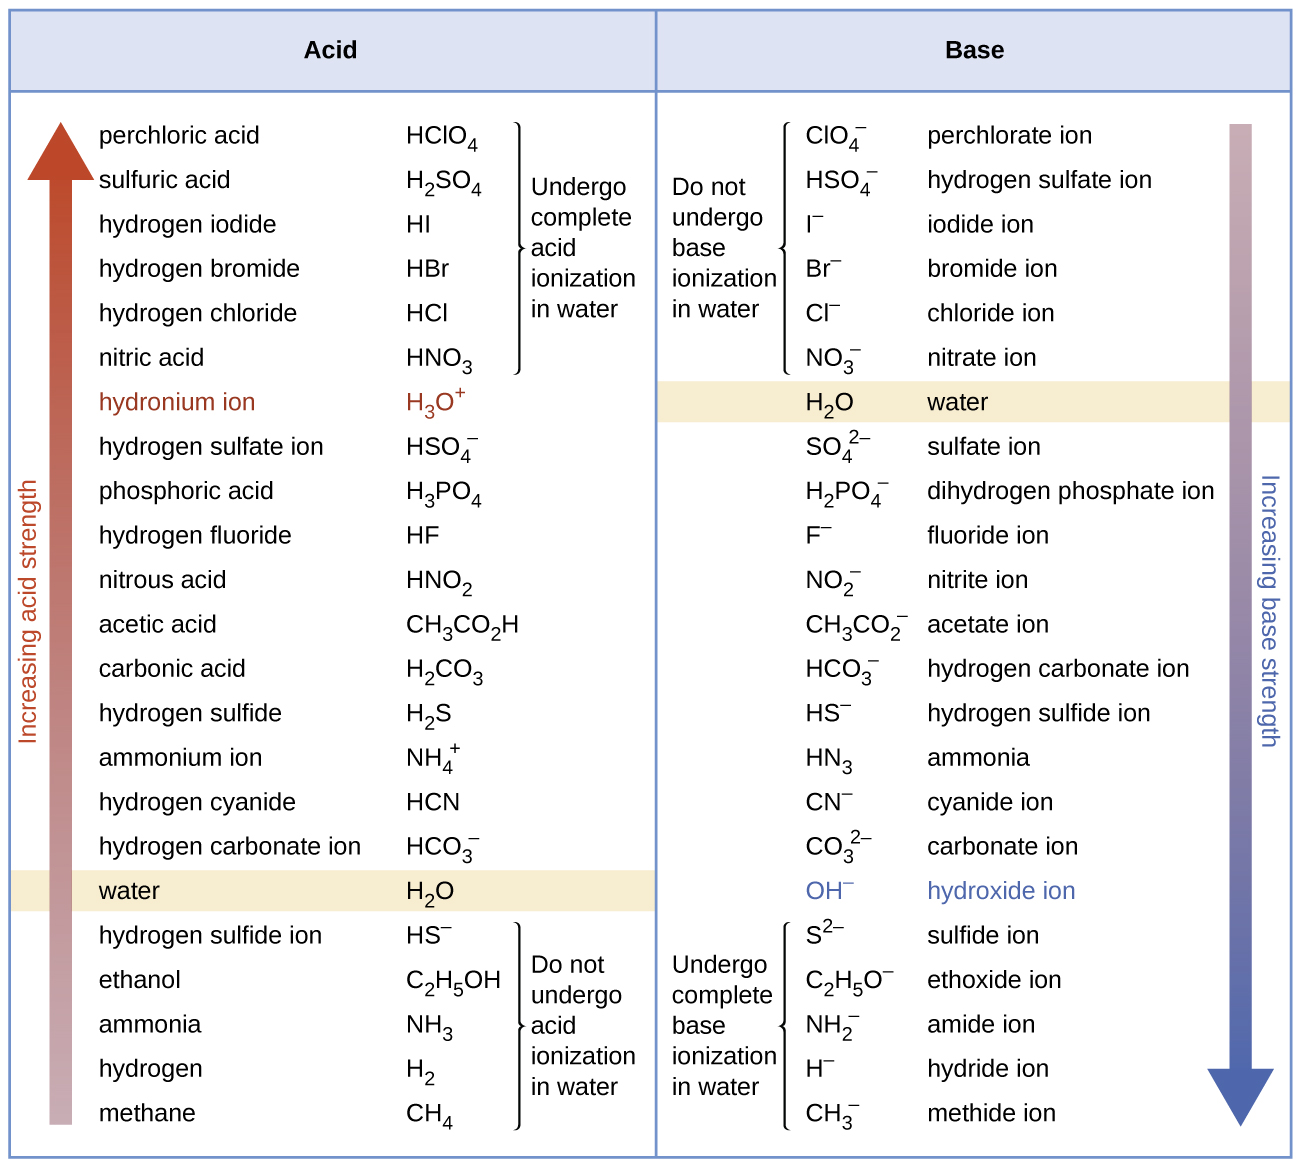 This figure includes a table separated into a left half which is labeled “Acids” and a right half labeled “Bases.” A red arrow points up the left side, which is labeled “Increasing acid strength.” Similarly, a blue arrow points downward along the right side, which is labeled “Increasing base strength.” Names of acids and bases are listed next to each arrow toward the center of the table, followed by chemical formulas. Acids listed top to bottom are sulfuric acid, H subscript 2 S O subscript 4, hydrogen iodide, H I, hydrogen bromide, H B r, hydrogen chloride, H C l, nitric acid, H N O subscript 3, hydronium ion ( in pink text) H subscript 3 O superscript plus, hydrogen sulfate ion, H S O subscript 4 superscript negative, phosphoric acid, H subscript 3 P O subscript 4, hydrogen fluoride, H F, nitrous acid, H N O subscript 2, acetic acid, C H subscript 3 C O subscript 2 H, carbonic acid H subscript 2 C O subscript 3, hydrogen sulfide, H subscript 2 S, ammonium ion, N H subscript 4 superscript +, hydrogen cyanide, H C N, hydrogen carbonate ion, H C O subscript 3 superscript negative, water (shaded in beige) H subscript 2 O, hydrogen sulfide ion, H S superscript negative, ethanol, C subscript 2 H subscript 5 O H, ammonia, N H subscript 3, hydrogen, H subscript 2, methane, and C H subscript 4. The acids at the top of the listing from sulfuric acid through nitric acid are grouped with a bracket to the right labeled “Undergo complete acid ionization in water.” Similarly, the acids at the bottom from hydrogen sulfide ion through methane are grouped with a bracket and labeled, “Do not undergo acid ionization in water.” The right half of the figure lists bases and formulas. From top to bottom the bases listed are hydrogen sulfate ion, H S O subscript 4 superscript negative, iodide ion, I superscript negative, bromide ion, B r superscript negative, chloride ion, C l superscript negative, nitrate ion, N O subscript 3 superscript negative, water (shaded in beige), H subscript 2 O, sulfate ion, S O subscript 4 superscript 2 negative, dihydrogen phosphate ion, H subscript 2 P O subscript 4 superscript negative, fluoride ion, F superscript negative, nitrite ion, N O subscript 2 superscript negative, acetate ion, C H subscript 3 C O subscript 2 superscript negative, hydrogen carbonate ion, H C O subscript 3 superscript negative, hydrogen sulfide ion, H S superscript negative, ammonia, N H subscript 3, cyanide ion, C N superscript negative, carbonate ion, C O subscript 3 superscript 2 negative, hydroxide ion (in blue), O H superscript negative, sulfide ion, S superscript 2 negative, ethoxide ion, C subscript 2 H subscript 5 O superscript negative, amide ion N H subscript 2 superscript negative, hydride ion, H superscript negative, and methide ion C H subscript 3 superscript negative. The bases at the top, from perchlorate ion through nitrate ion are group with a bracket which is labeled “Do not undergo base ionization in water.” Similarly, the lower 5 in the listing, from sulfide ion through methide ion are grouped and labeled “Undergo complete base ionization in water.”